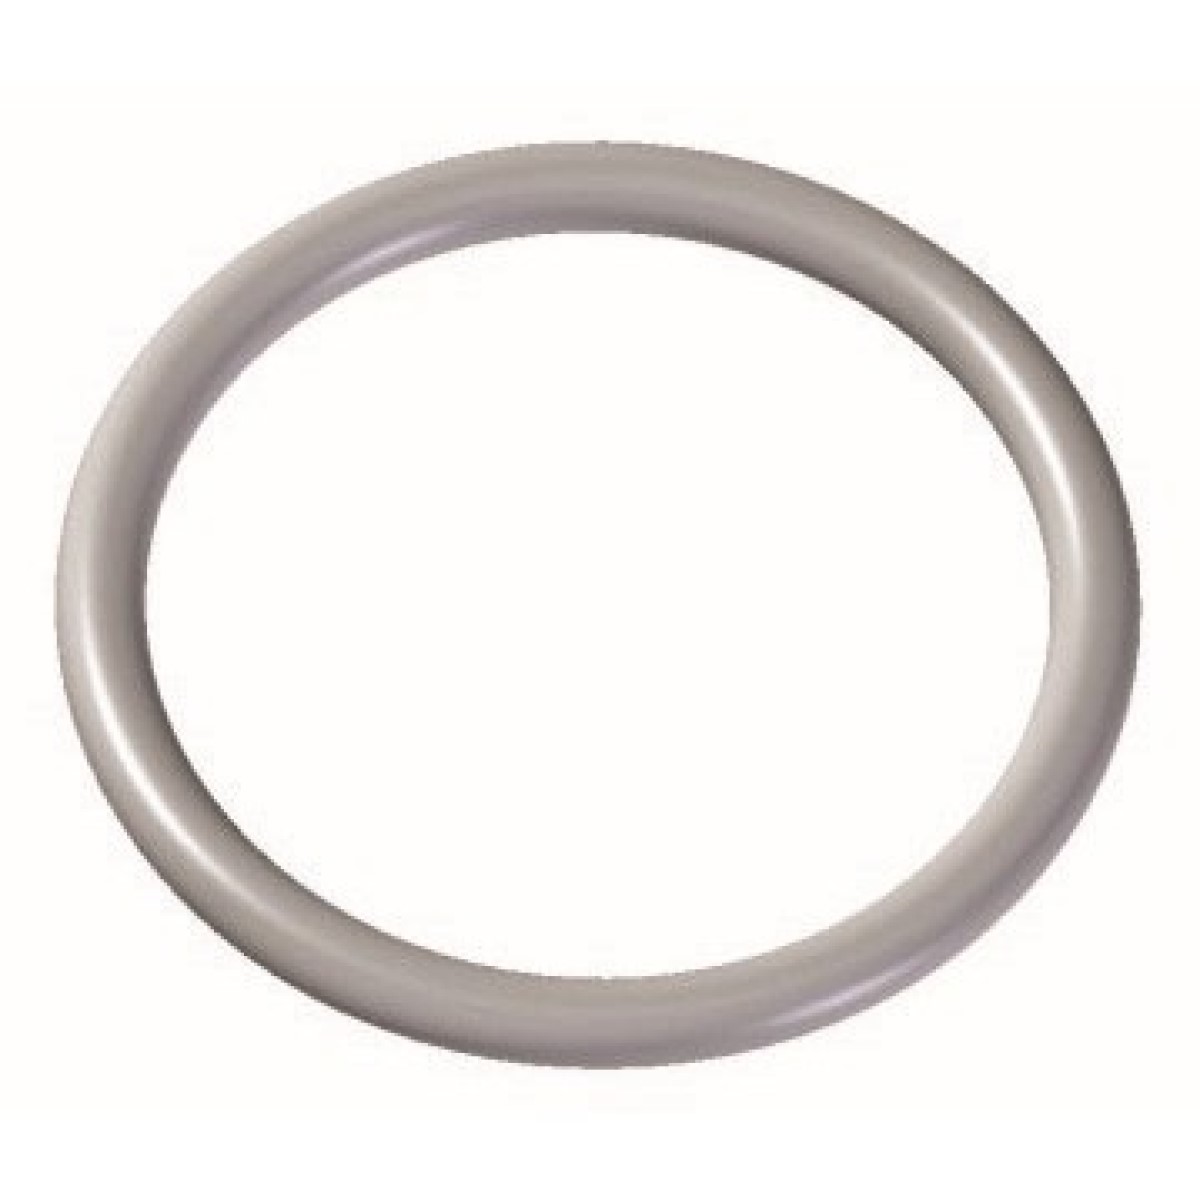 O-ring for 1